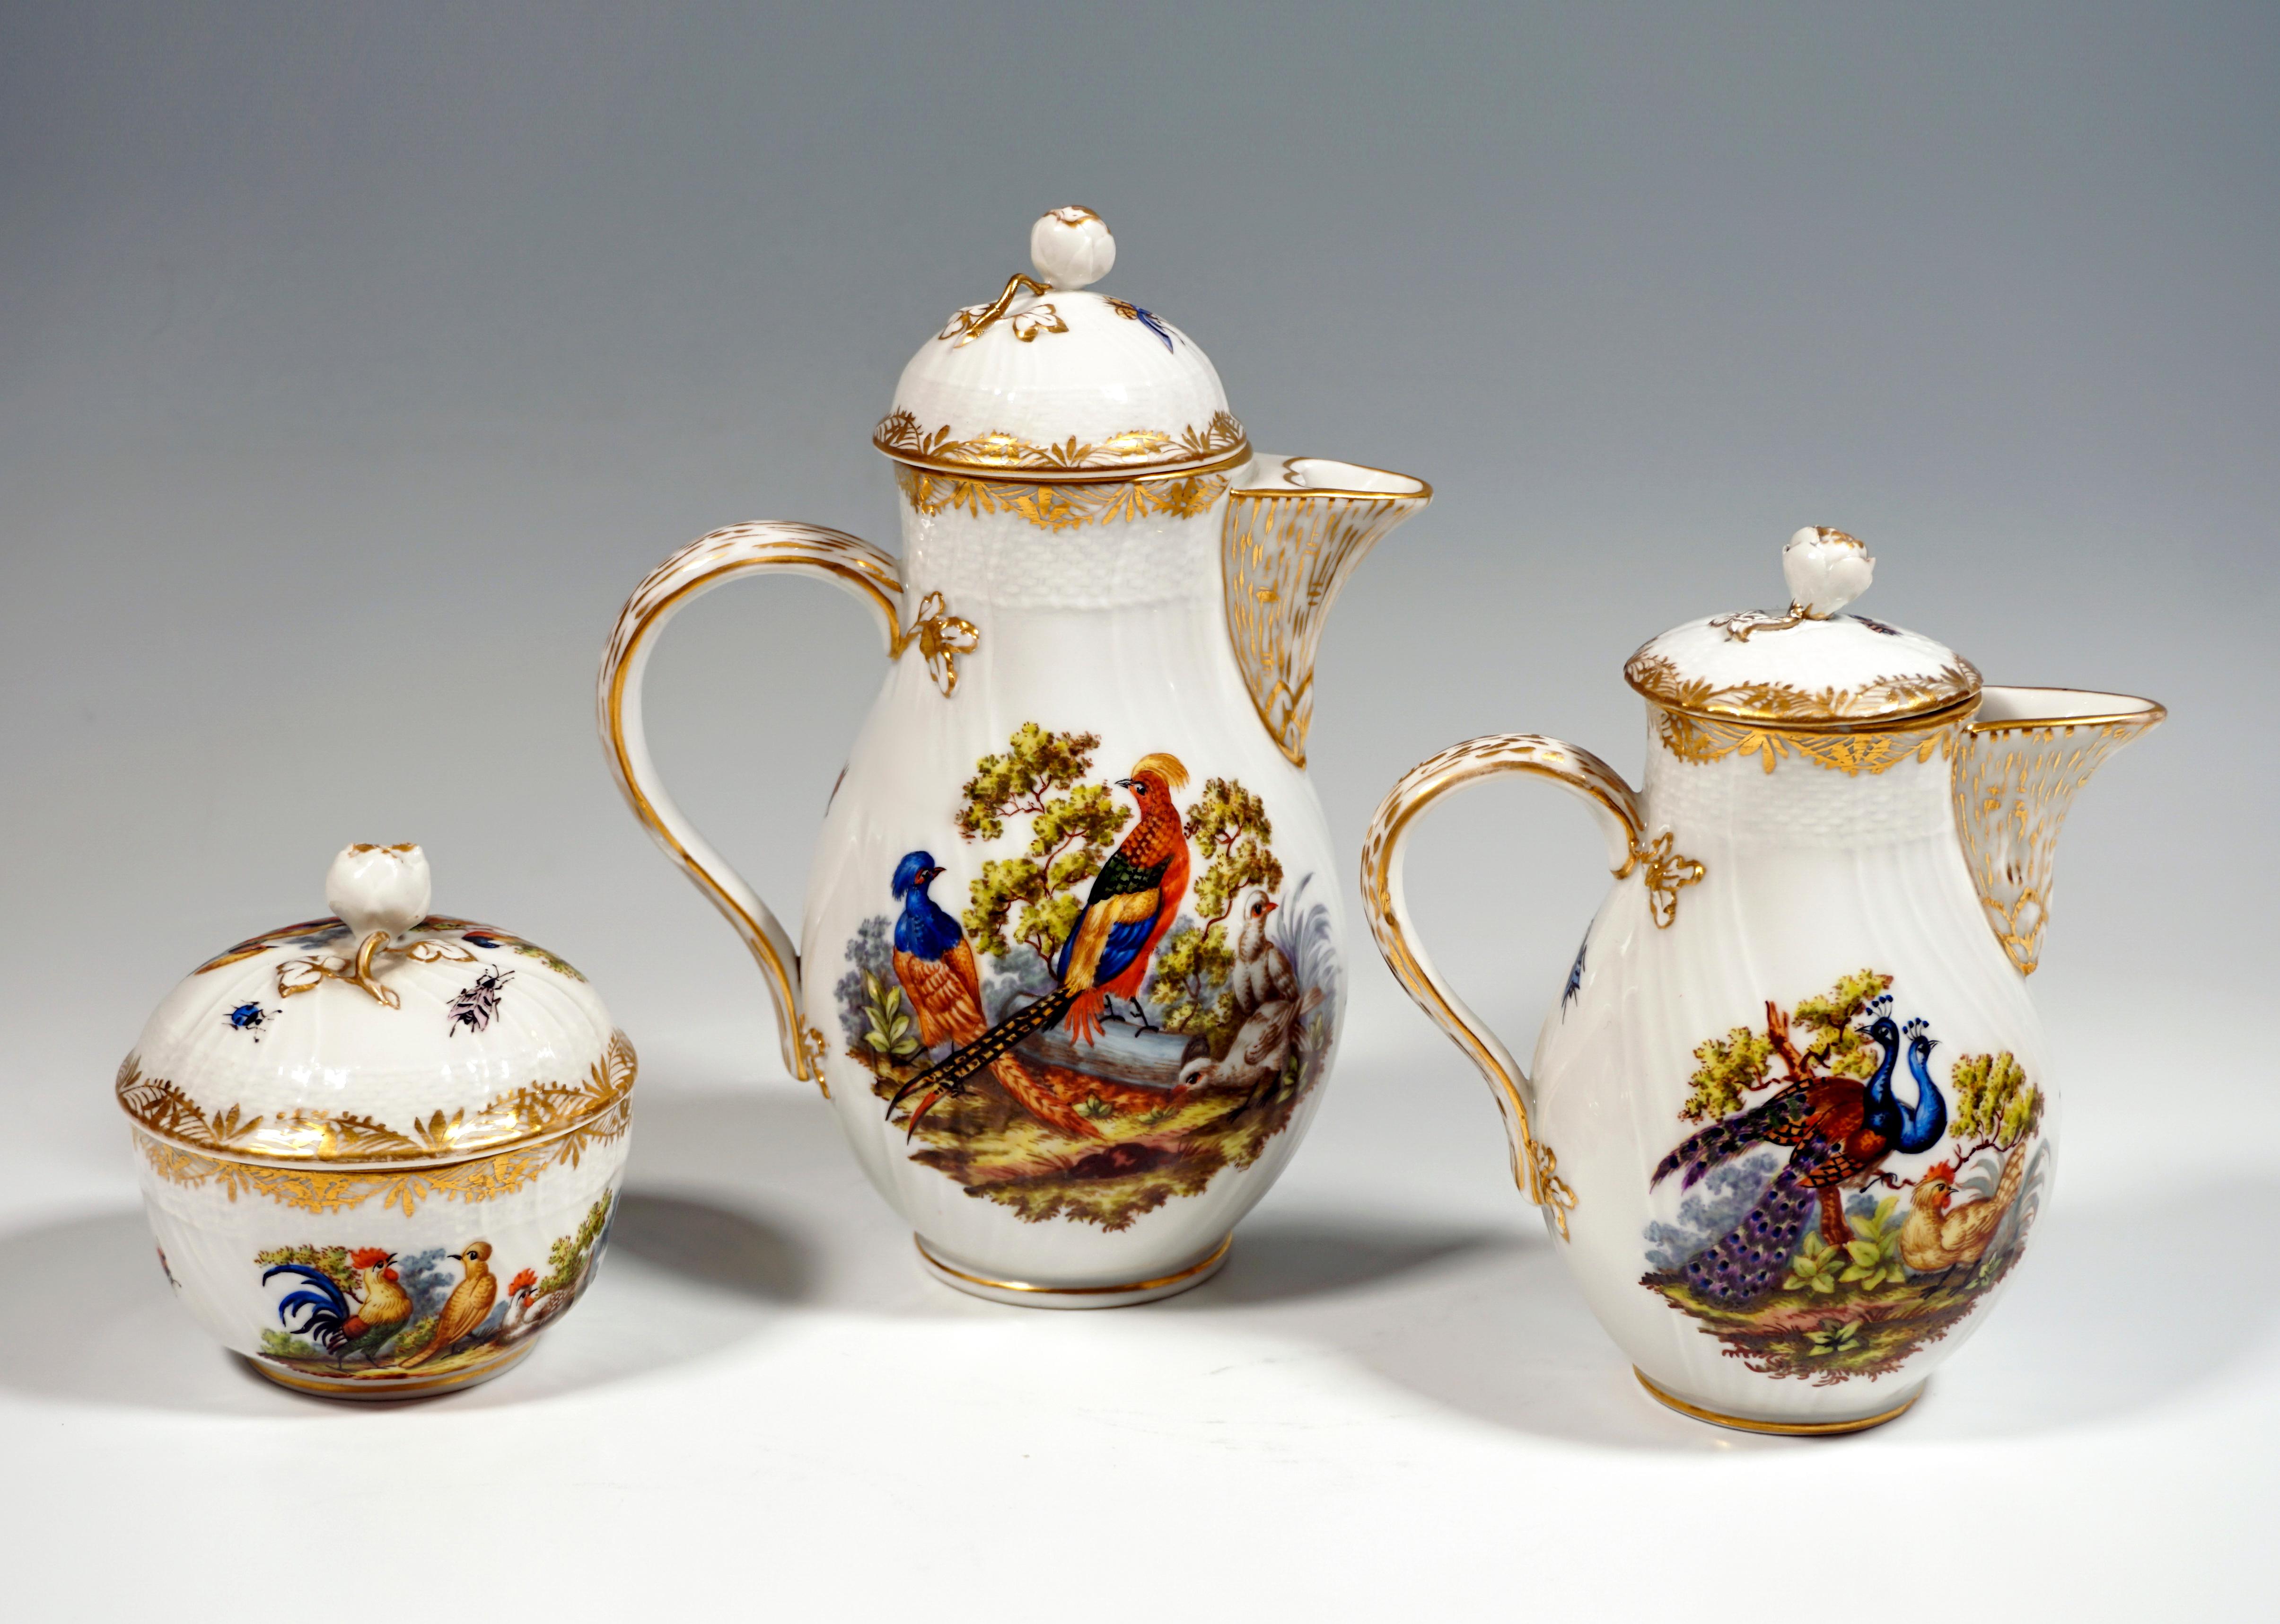 Hand-Painted KPM Berlin Coffee Set, Dejeuner for 2 Persons, Birds, Insects & Gold, ca 1900